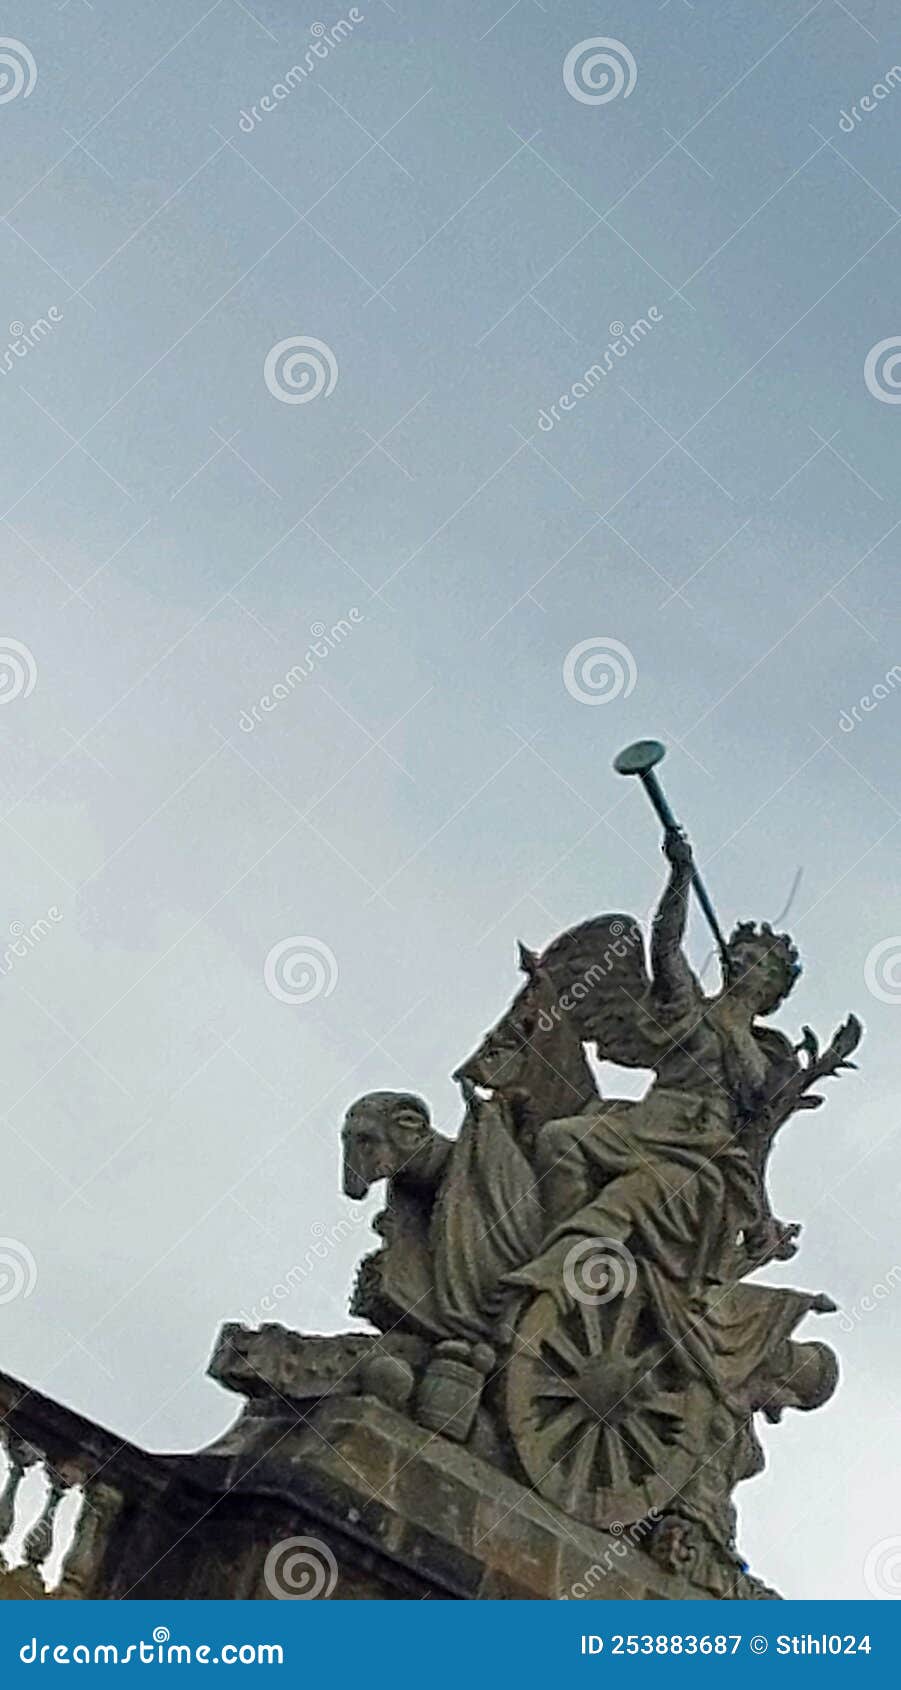 statue with angel sounding trumpet on chariot